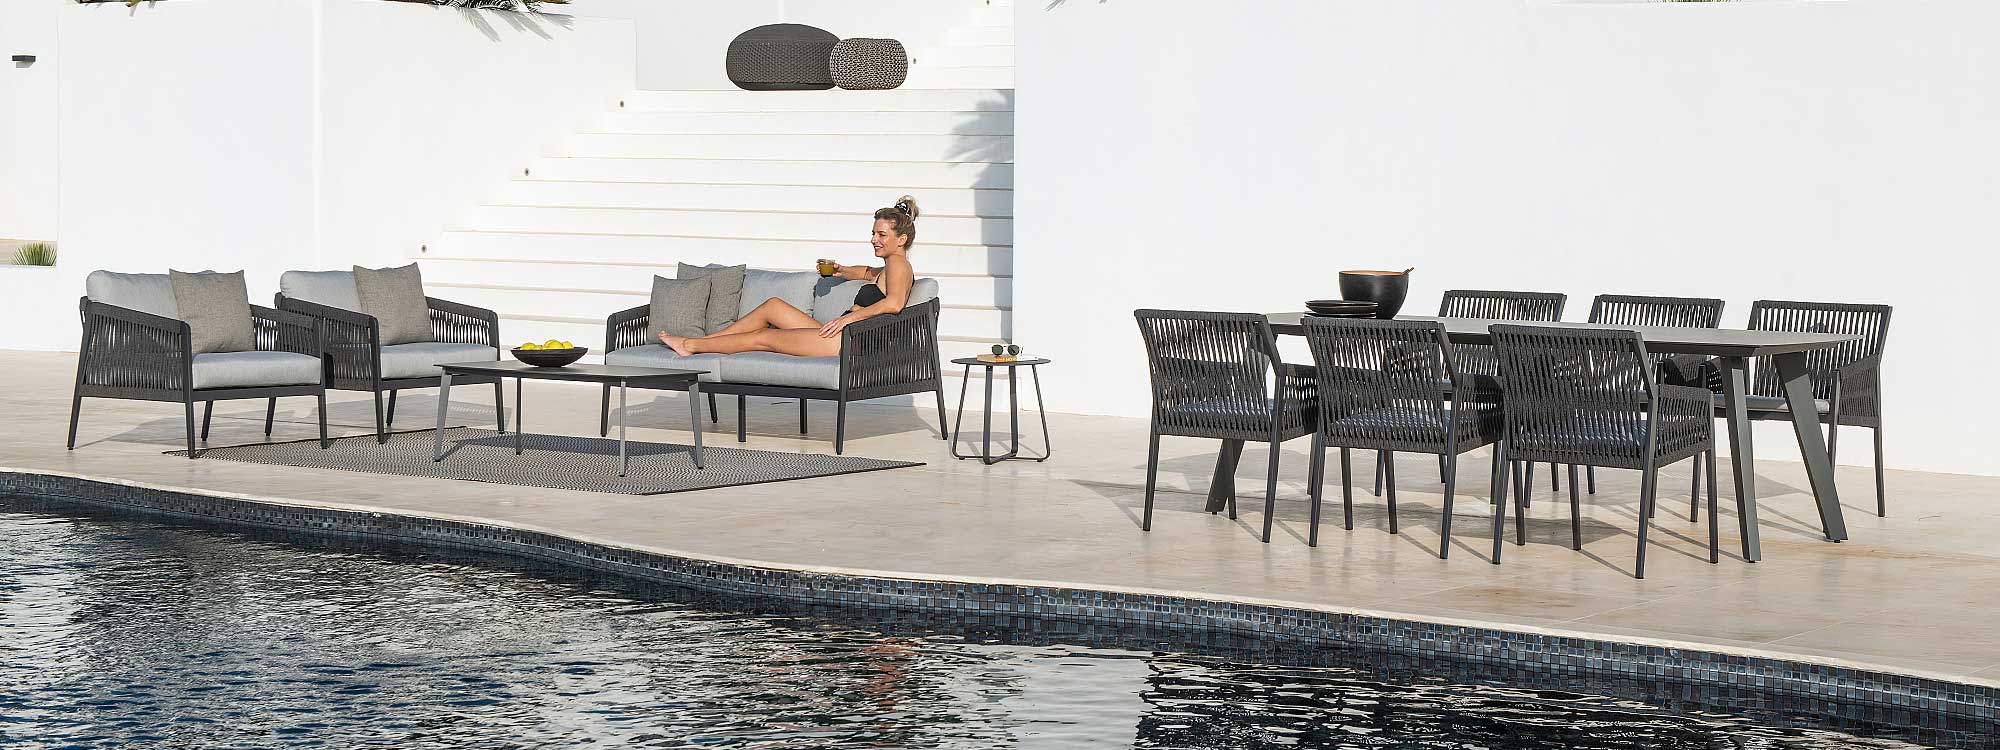 Image of woman relaxing on Ritz black garden sofa on poolside, next to Ritz ceramic garden table and chairs